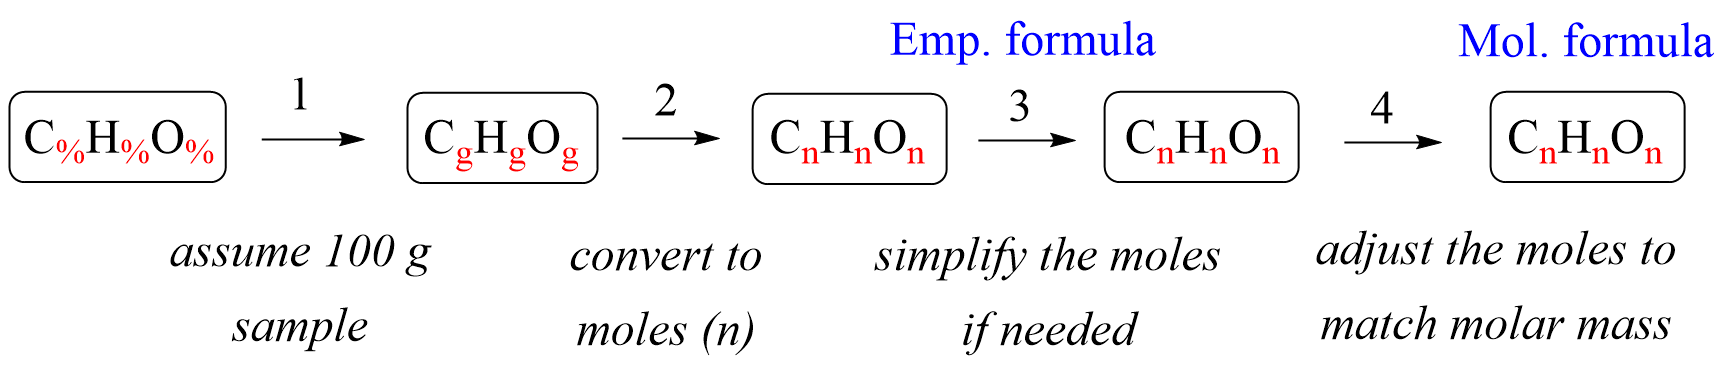 empirical formula from percentage of elements